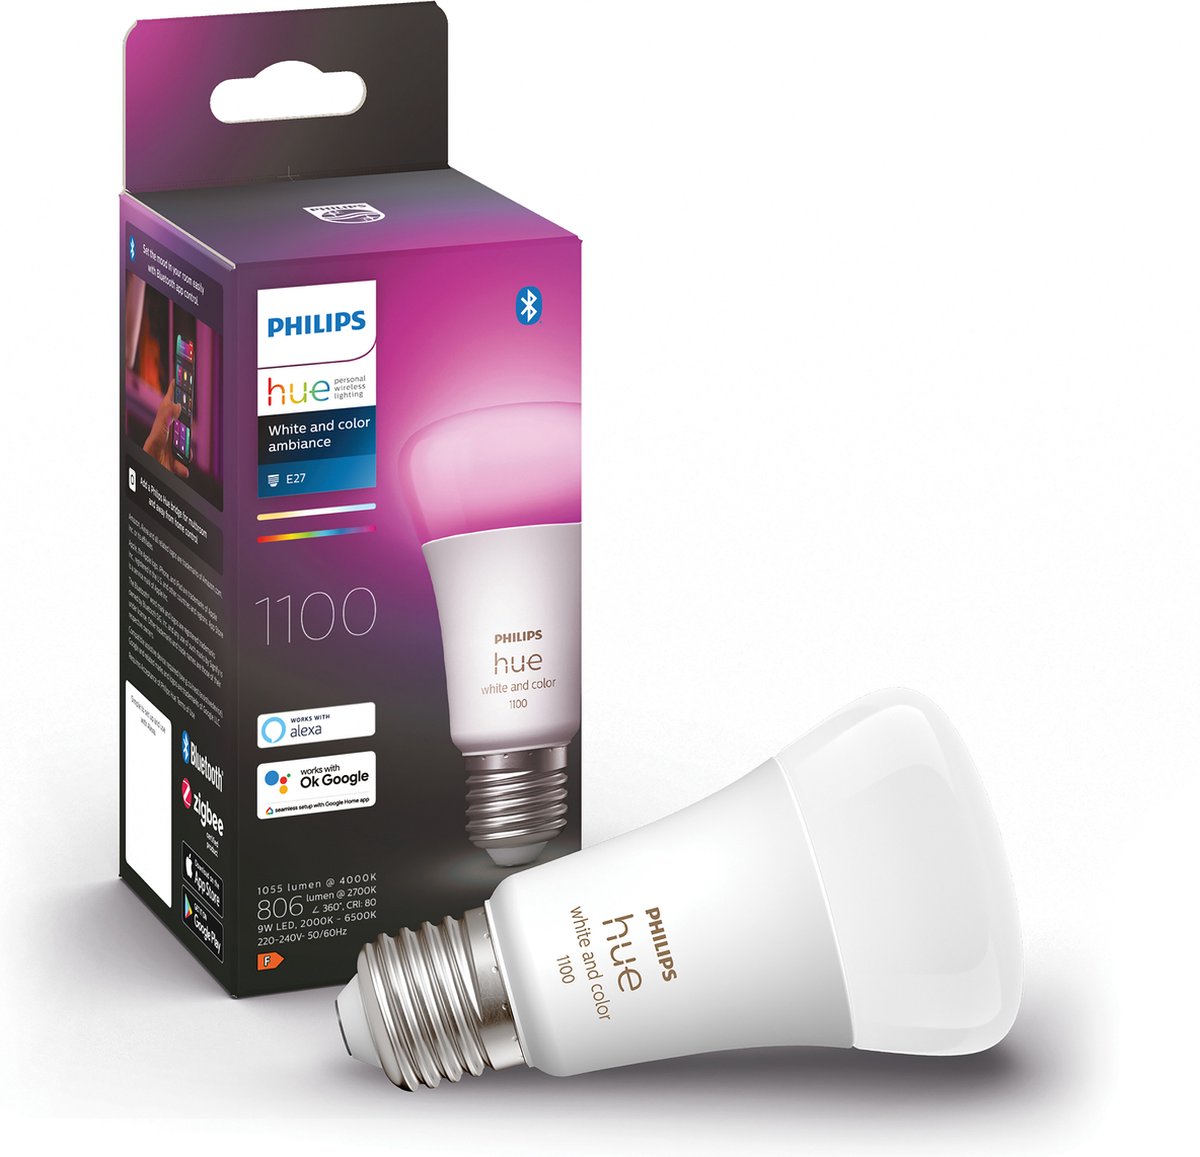 Philips Hue E27 – White and Color Ambiance – 1100lm